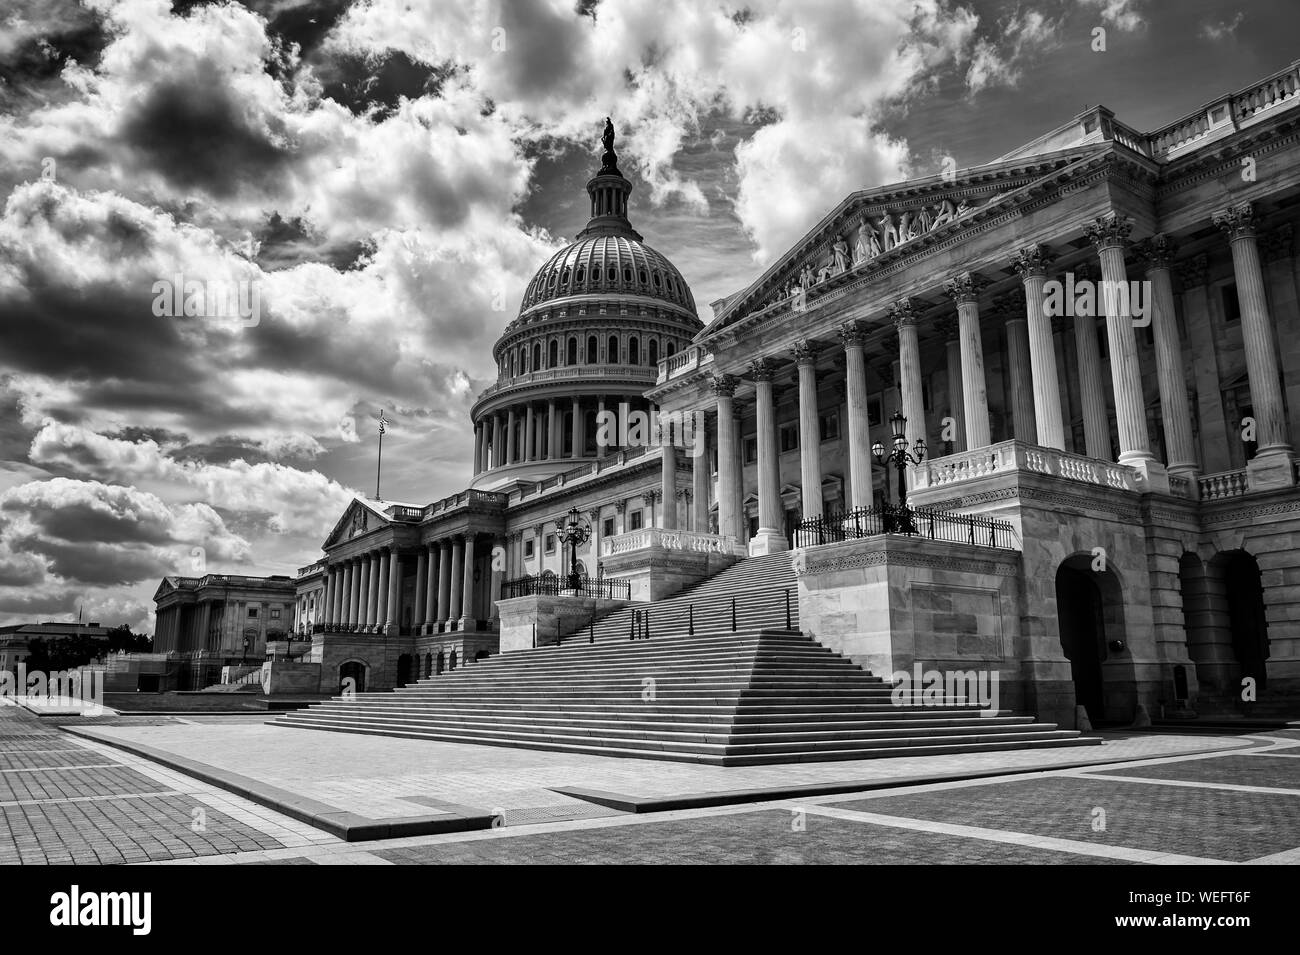 Dark and foreboding black and white view of the US Capitol Building in Washington DC Stock Photo